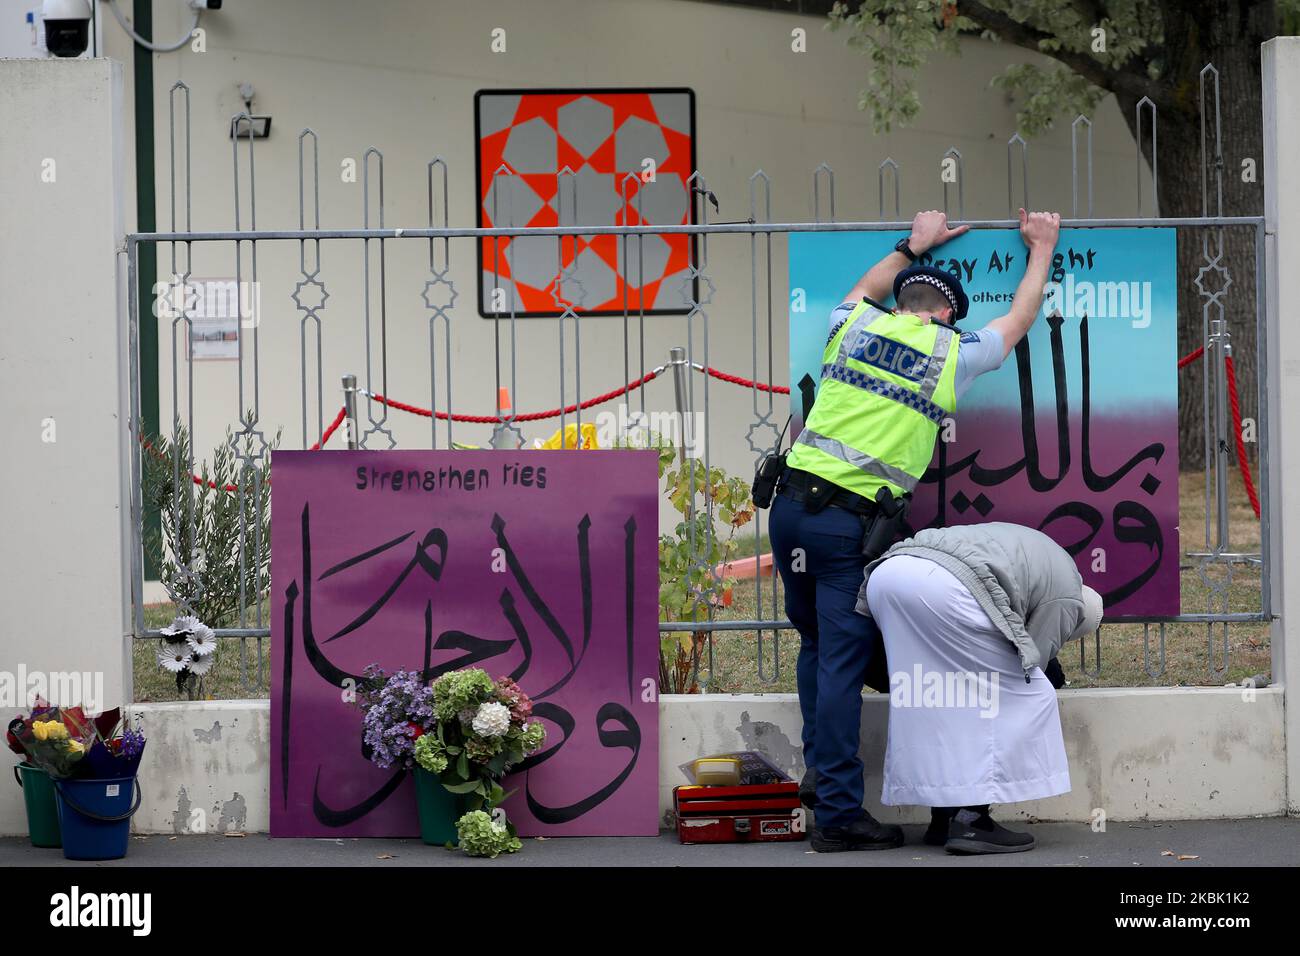 A police officer helps a member of the Muslim community to fix a bordÂ outside the Al Noor mosque in Christchurch, New Zealand on March 15, 2020. On March 15 last year, 51 people died and 49 were injured in the shootings at Christchurch's Al Noor and Linwood MosquesÂ when a gunman opened fire on worshippers.Â It was labeled as New Zealand's 'darkest day'.Â Events around the country including the Christchurch National Remembrance Service which marking the first anniversary of the attacks has been canceled amid safety fears over Covid-19.Â (Photo by Sanka Vidanagama/NurPhoto) Stock Photo